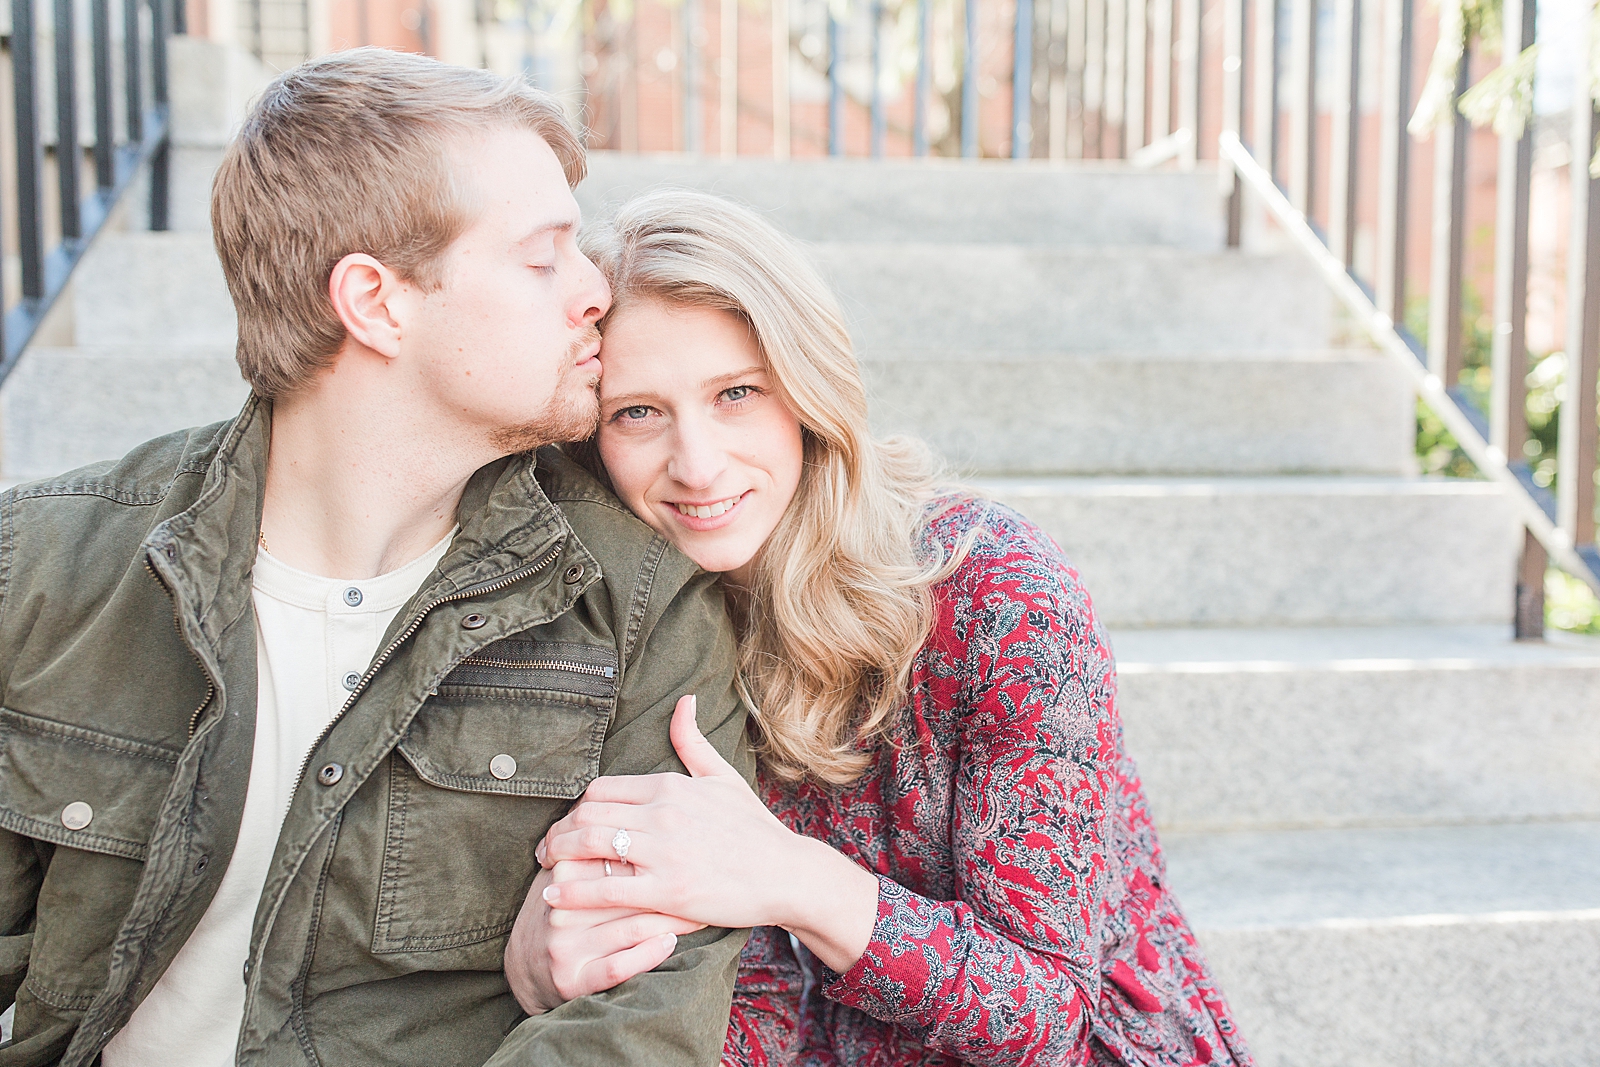 Winston-Salem Engagement Session Chris kissing Katie on the head sitting on stairs Photo